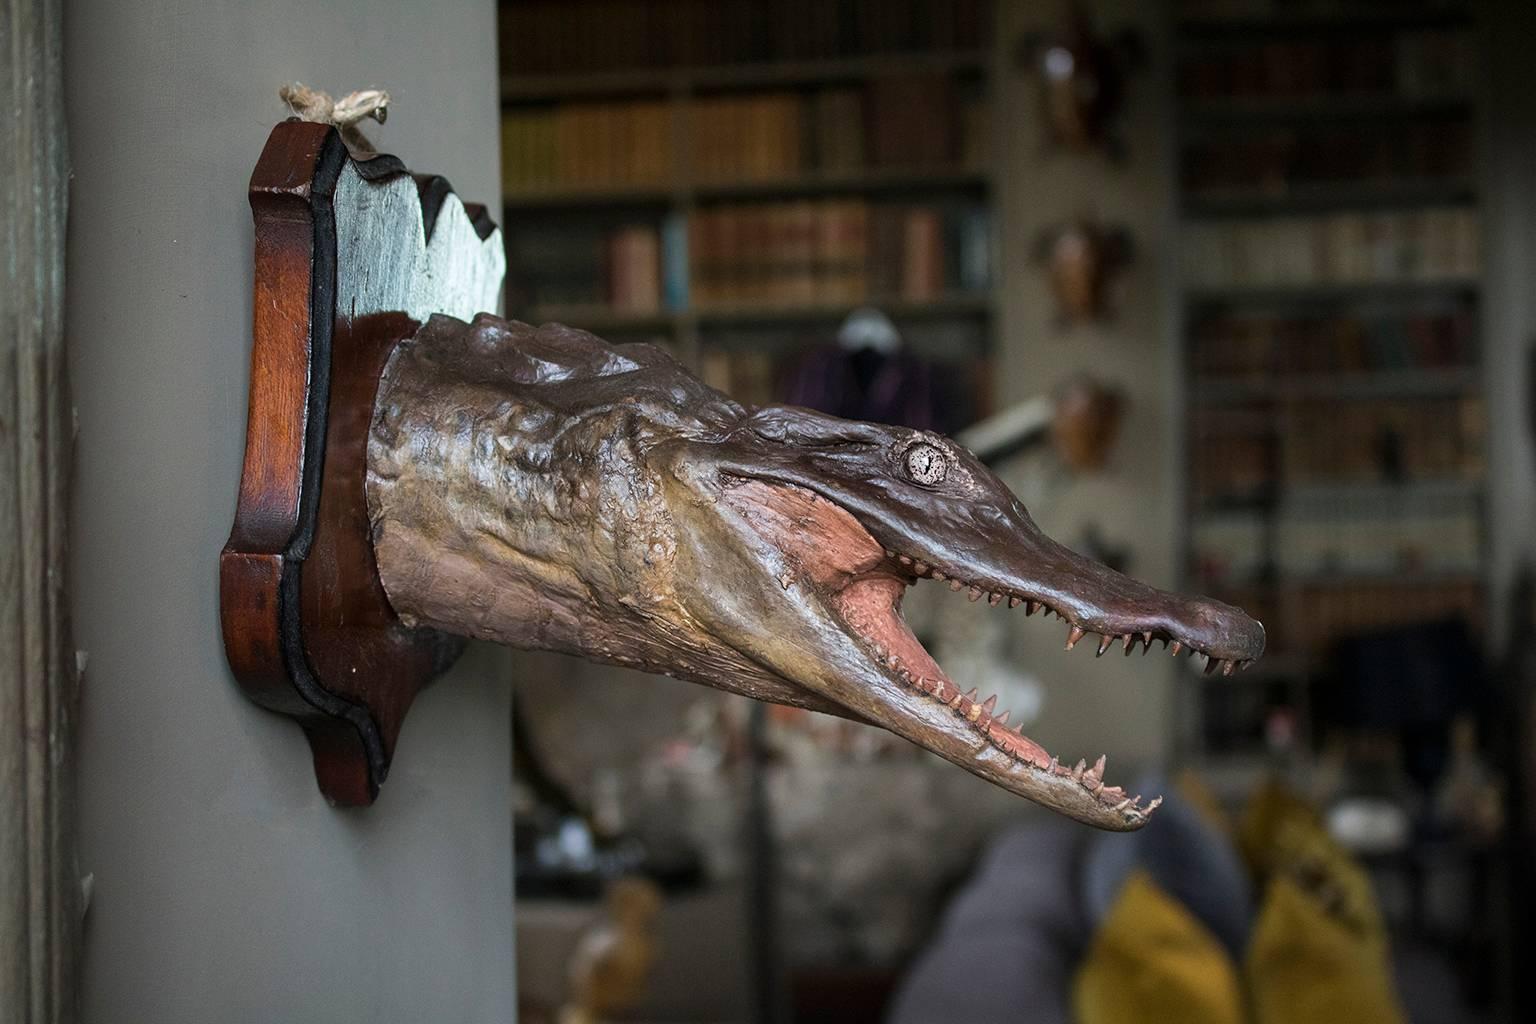 Taxidermy crocodile head with open mouth mounted on wooden ornate shield.